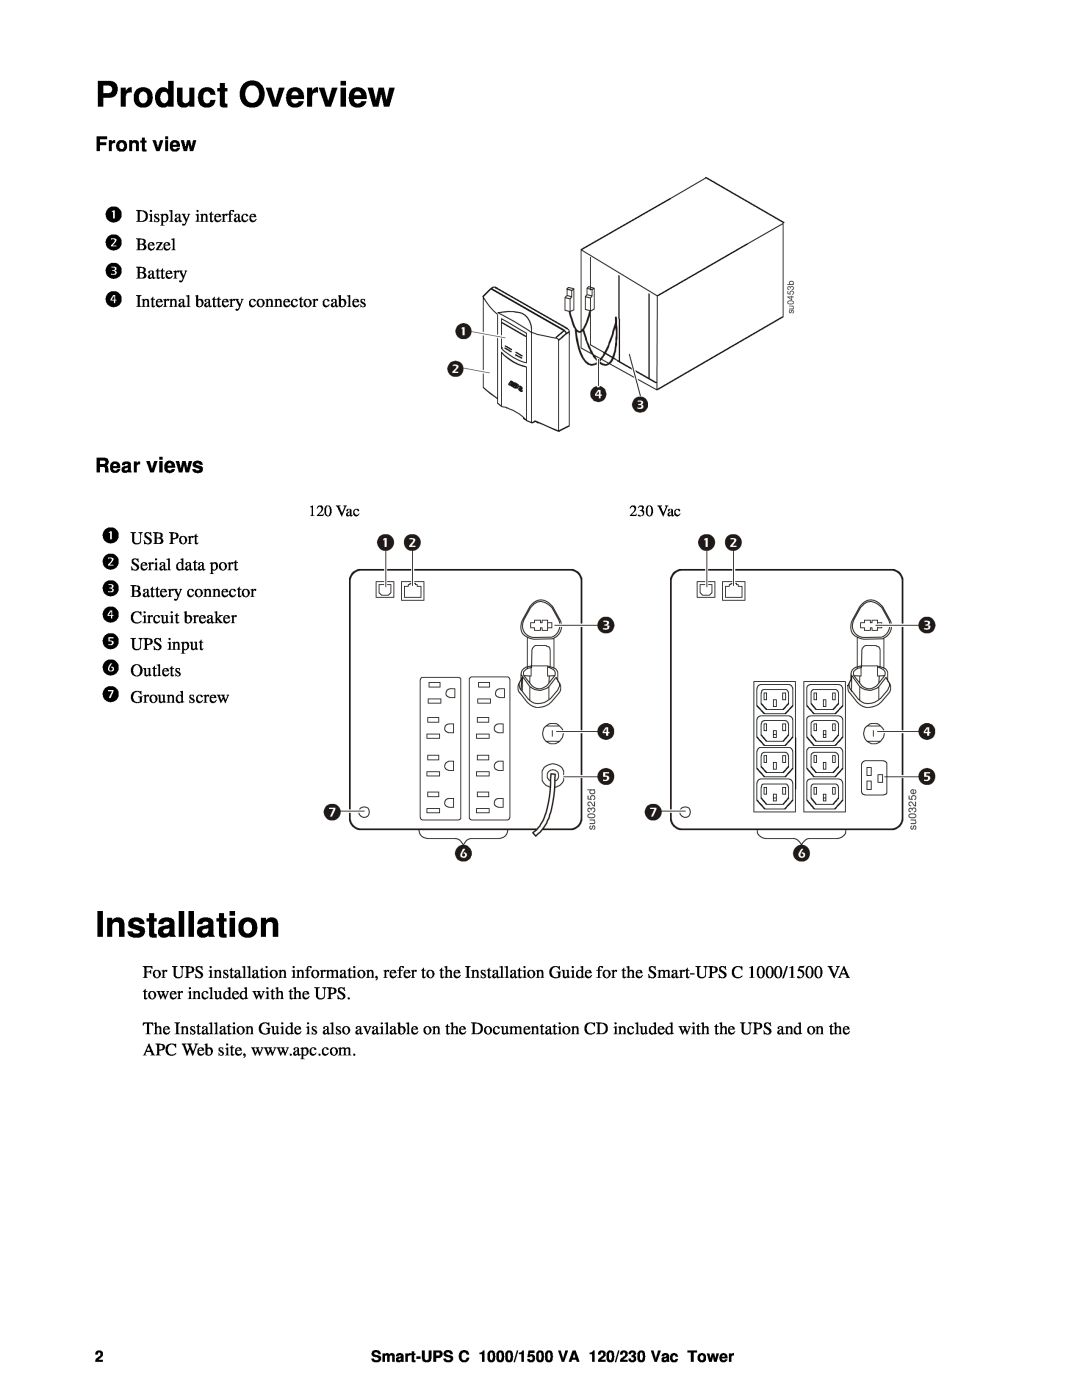 APC SMC1500, SMC1000 operation manual Product Overview, Installation, Front view, Rear views 